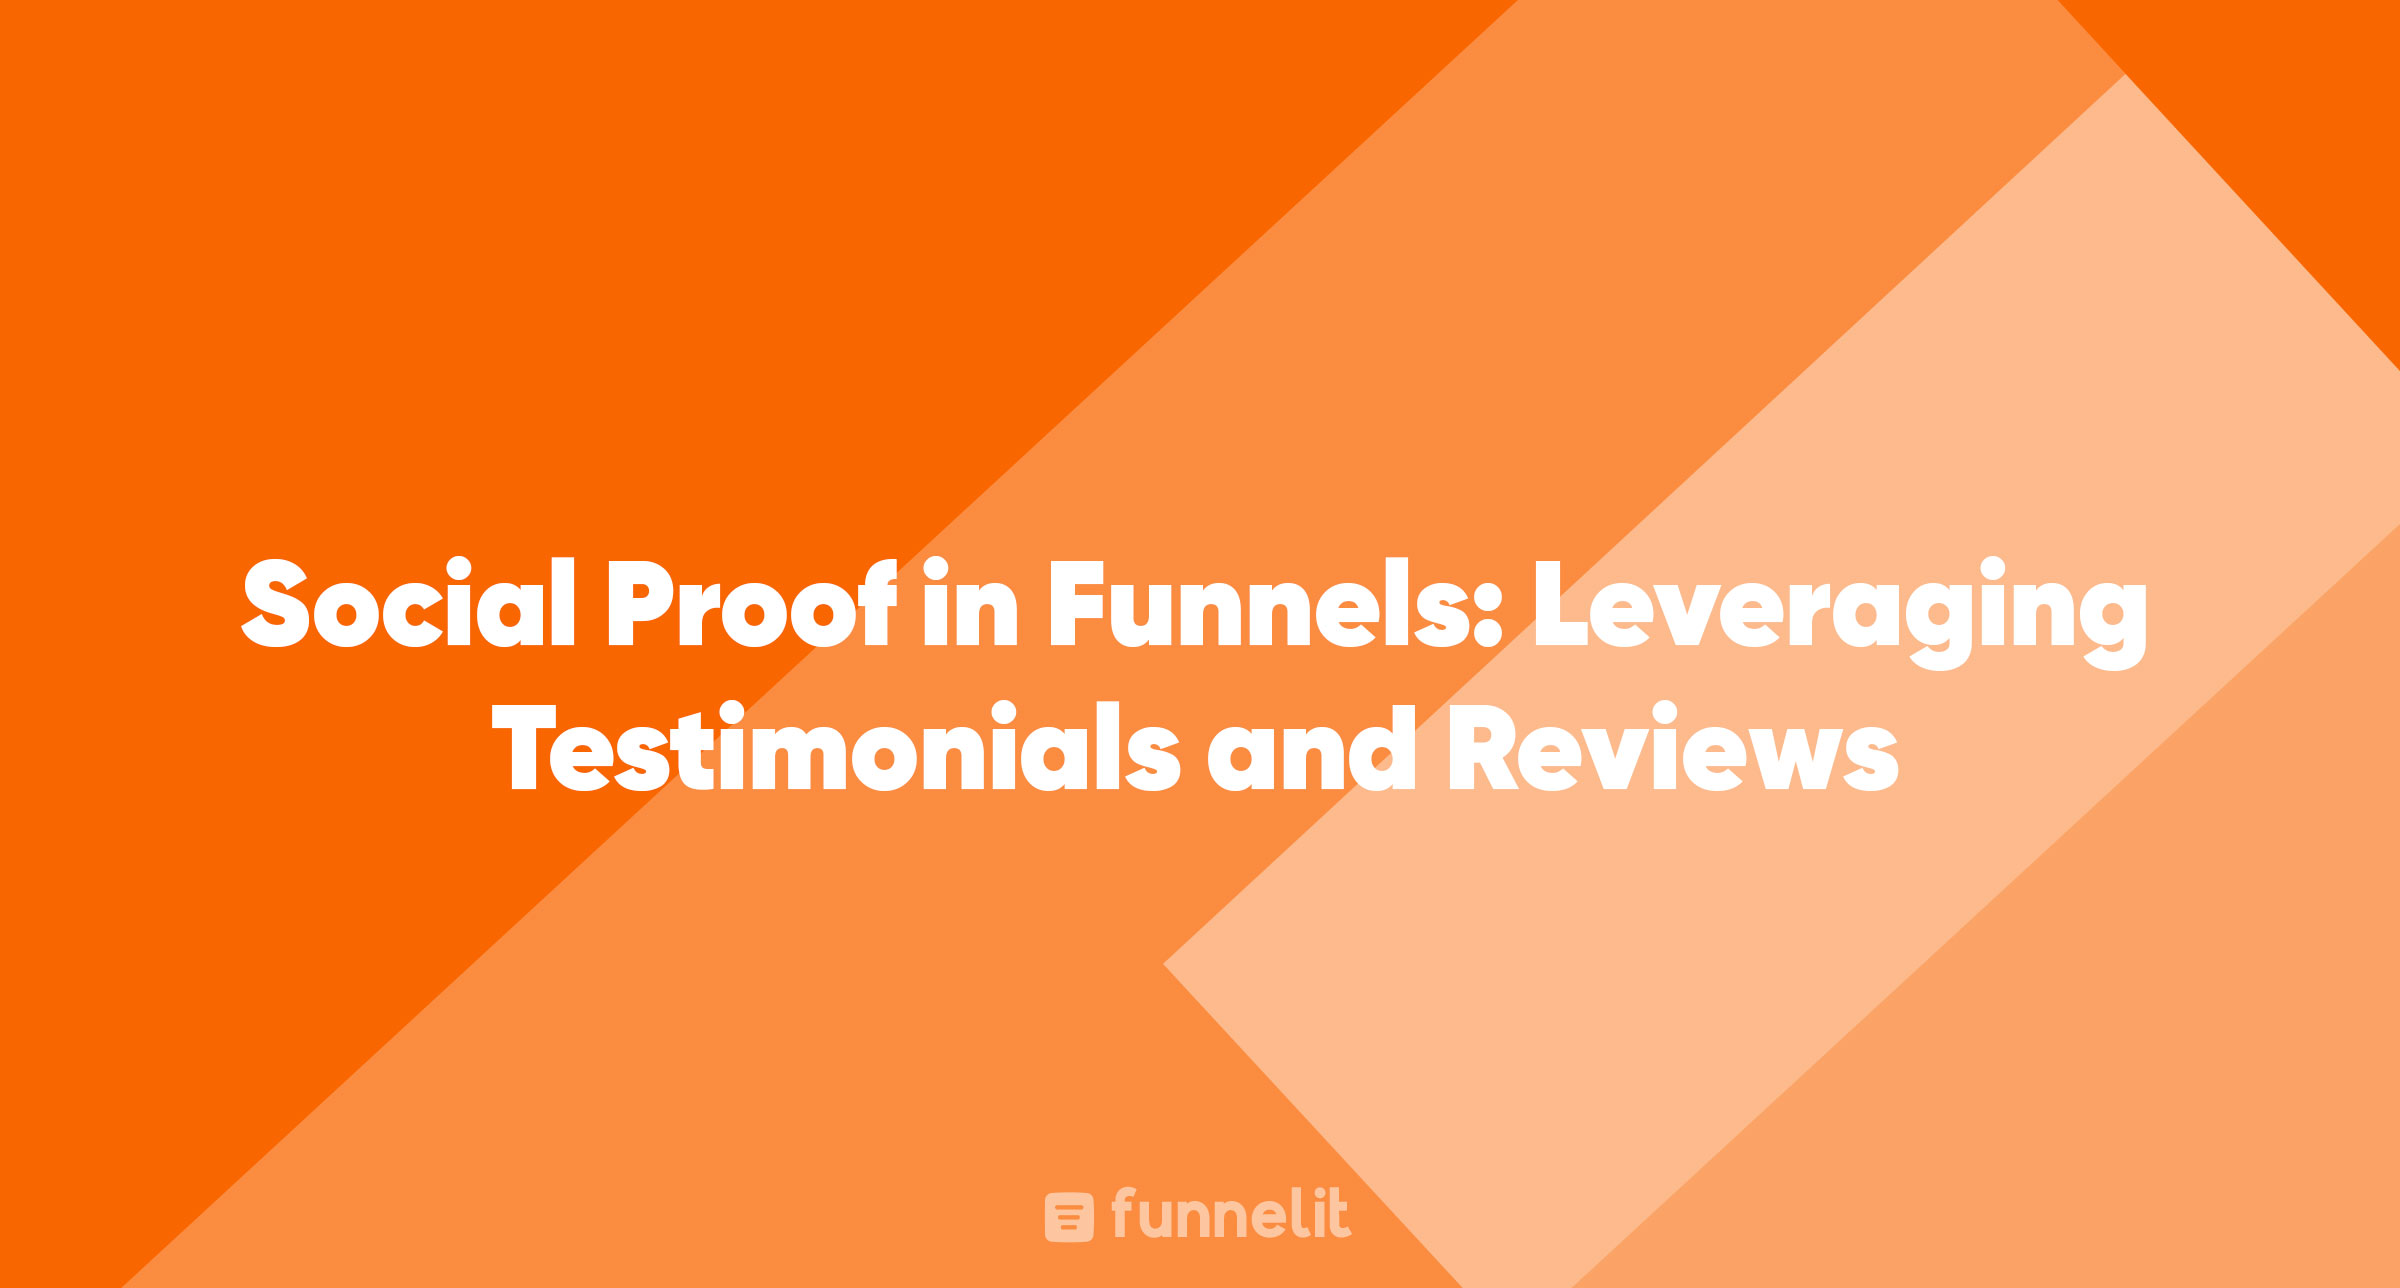 Article | Social Proof in Funnels: Leveraging Testimonials and Reviews